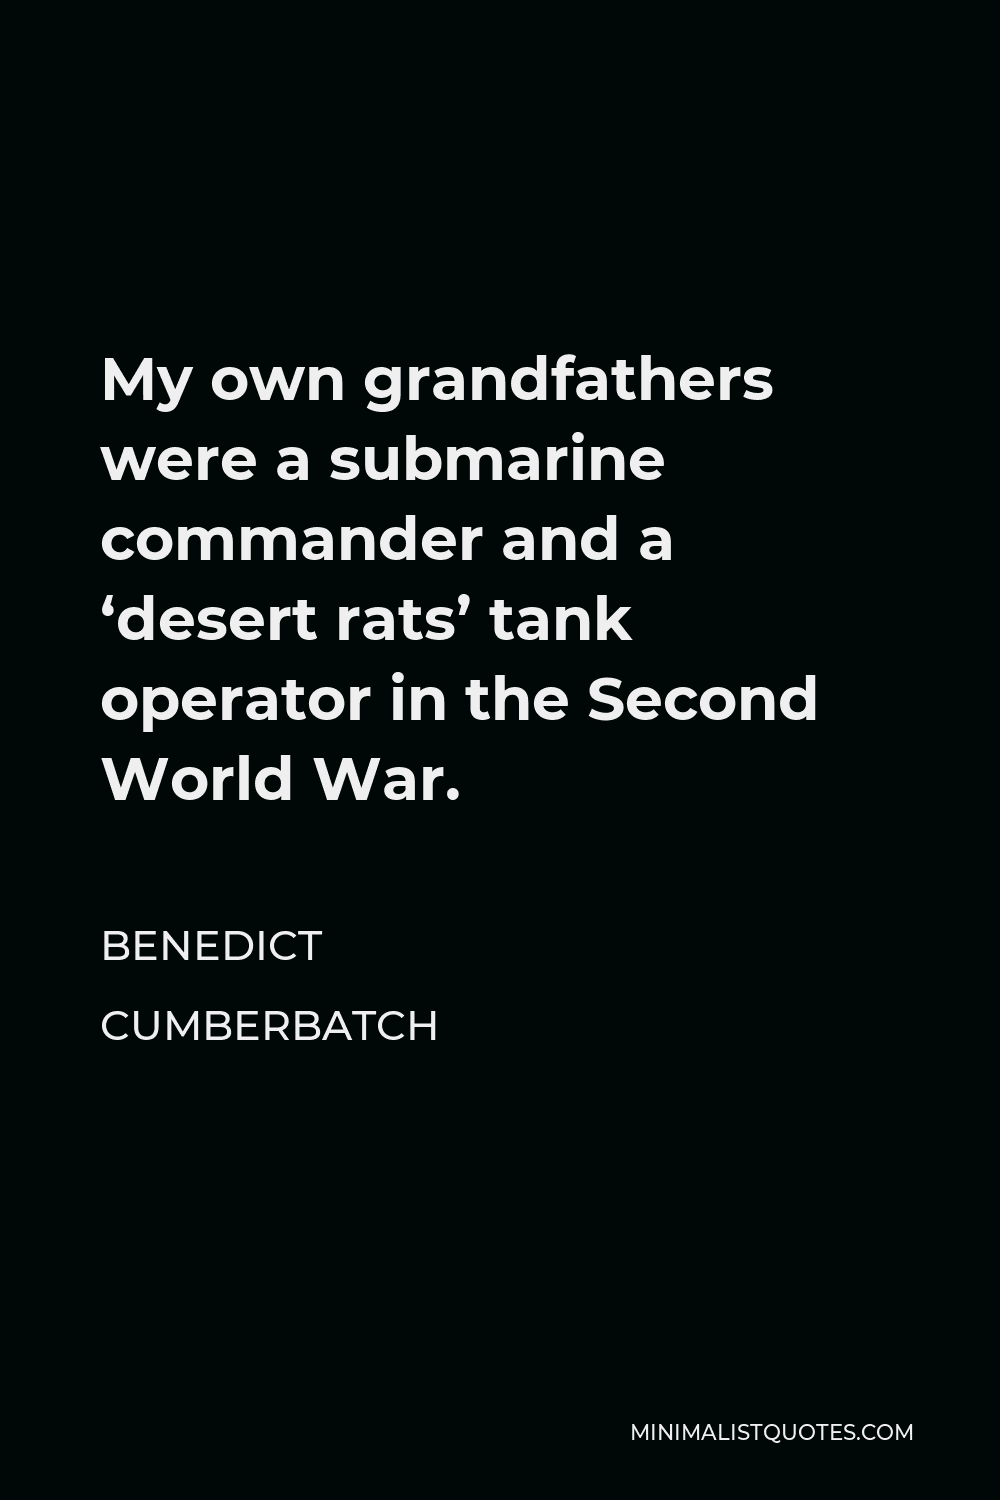 Benedict Cumberbatch Quote - My own grandfathers were a submarine commander and a ‘desert rats’ tank operator in the Second World War.